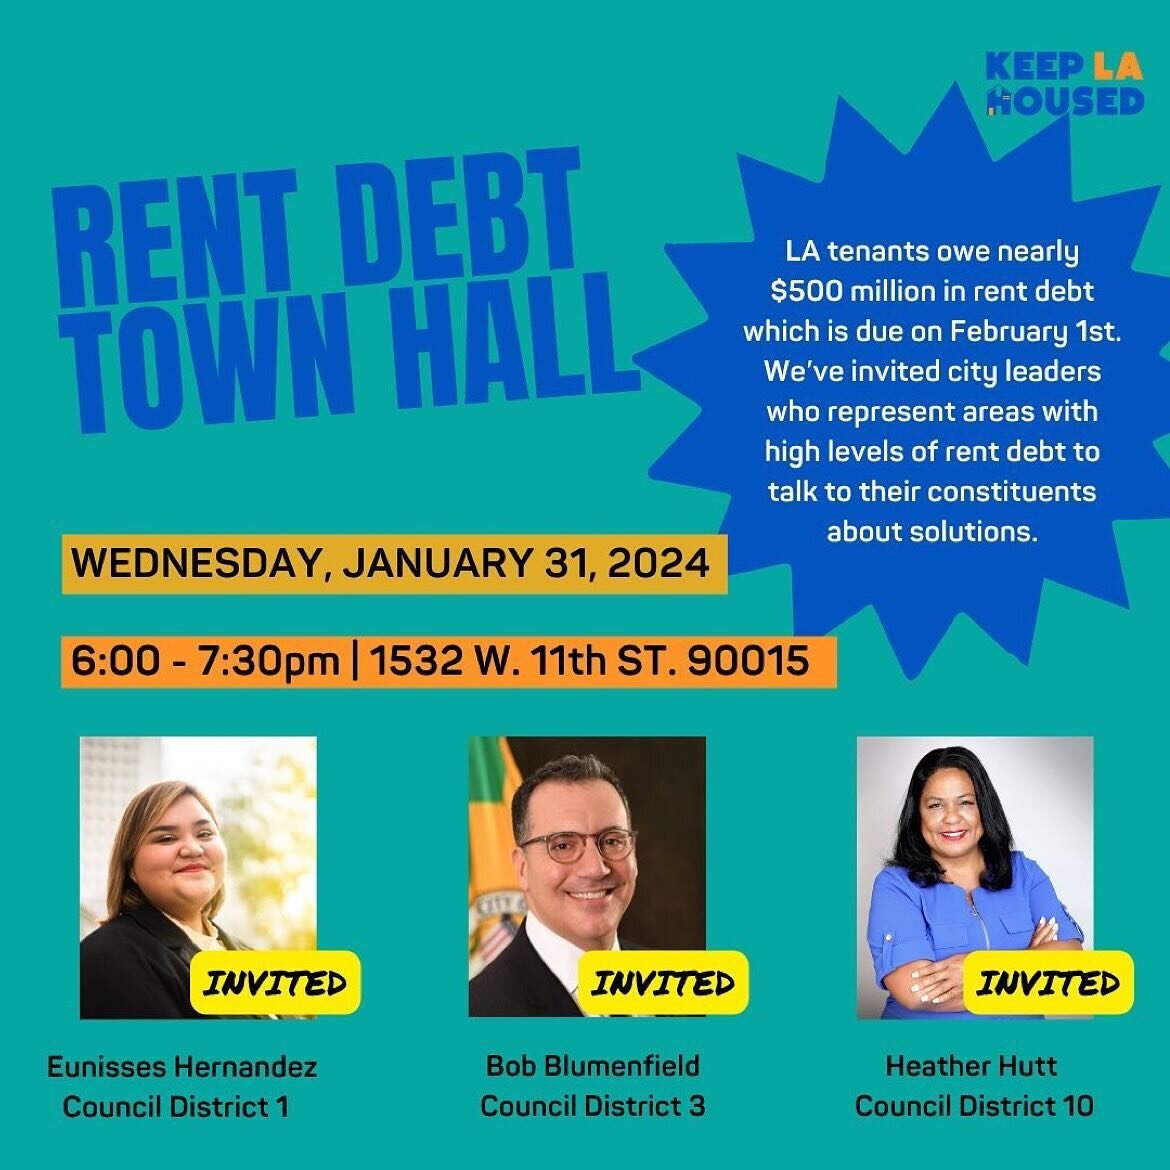 #Rp @keeplahoused
🗣️Tomorrow! Join us for a rent debt town hall in person from 6-7:30pm! We have invited Councilmembers Eunisses Hernandez (CD 1), Heather Hutt (CD10), and Bob Blumenfield (CD 3), and hope to hear directly from them. We&rsquo;ll also